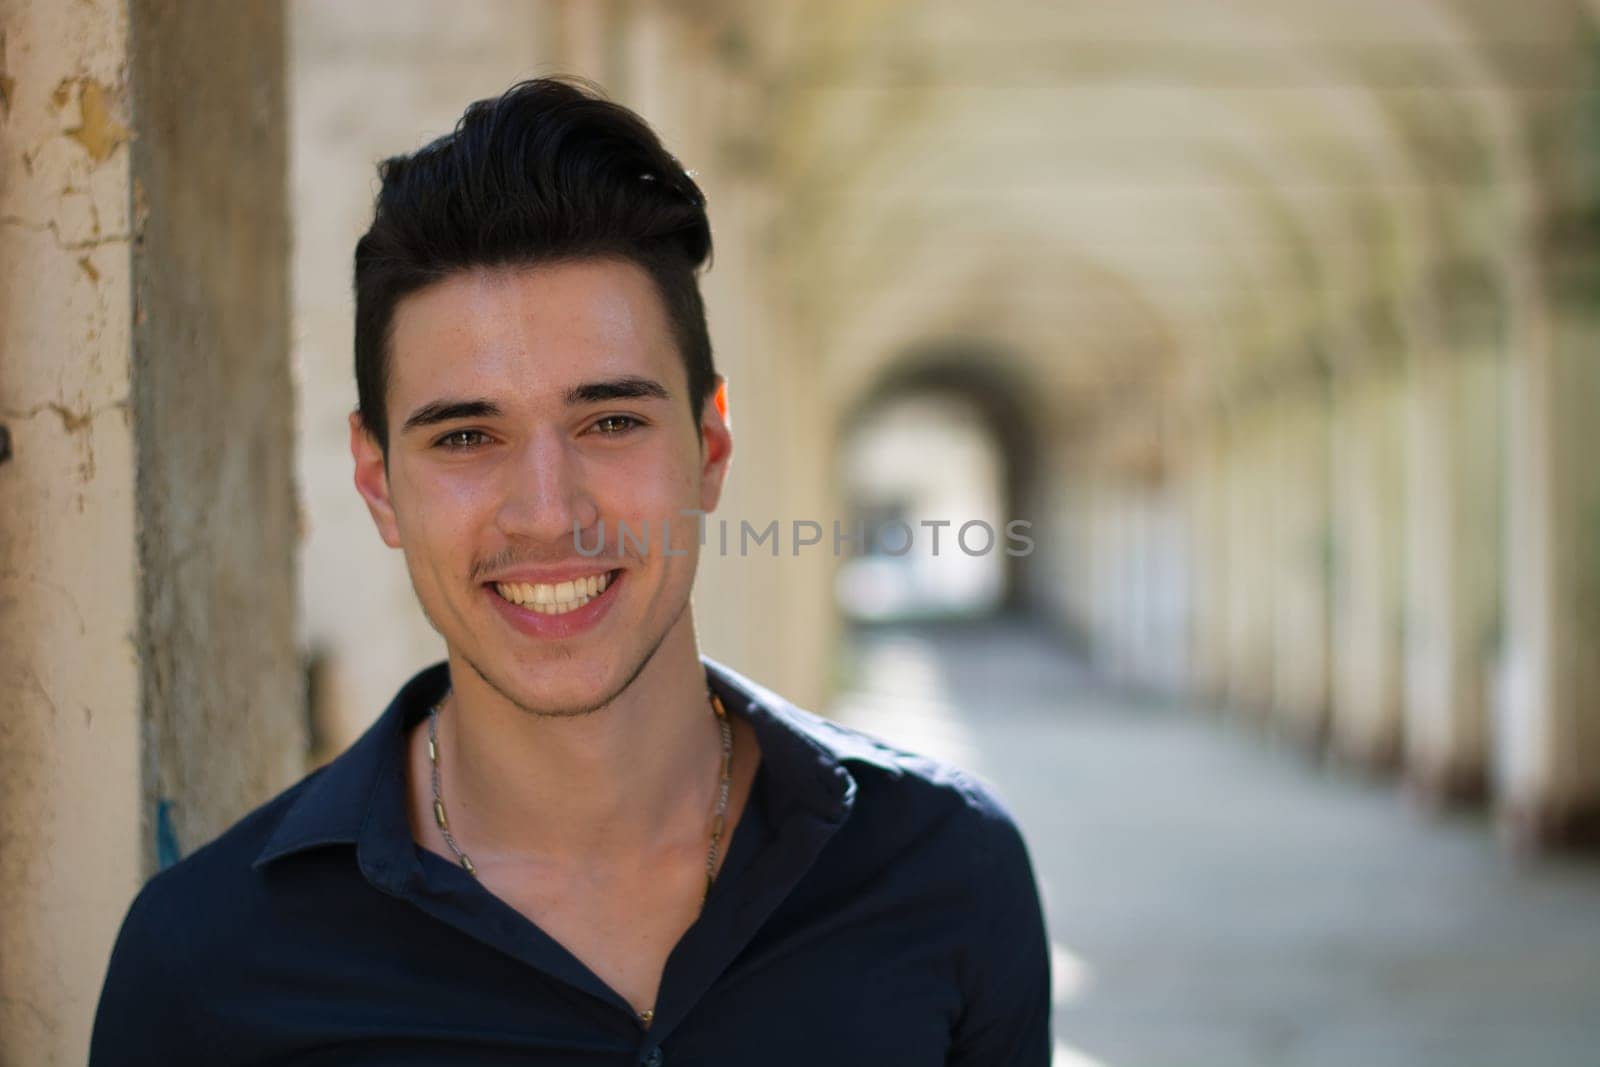 A young man is smiling for the camera. Photo of a young man with a bright smile, outdoor under a colonnade in European city. A cheerful young adult smiling with eye contact.